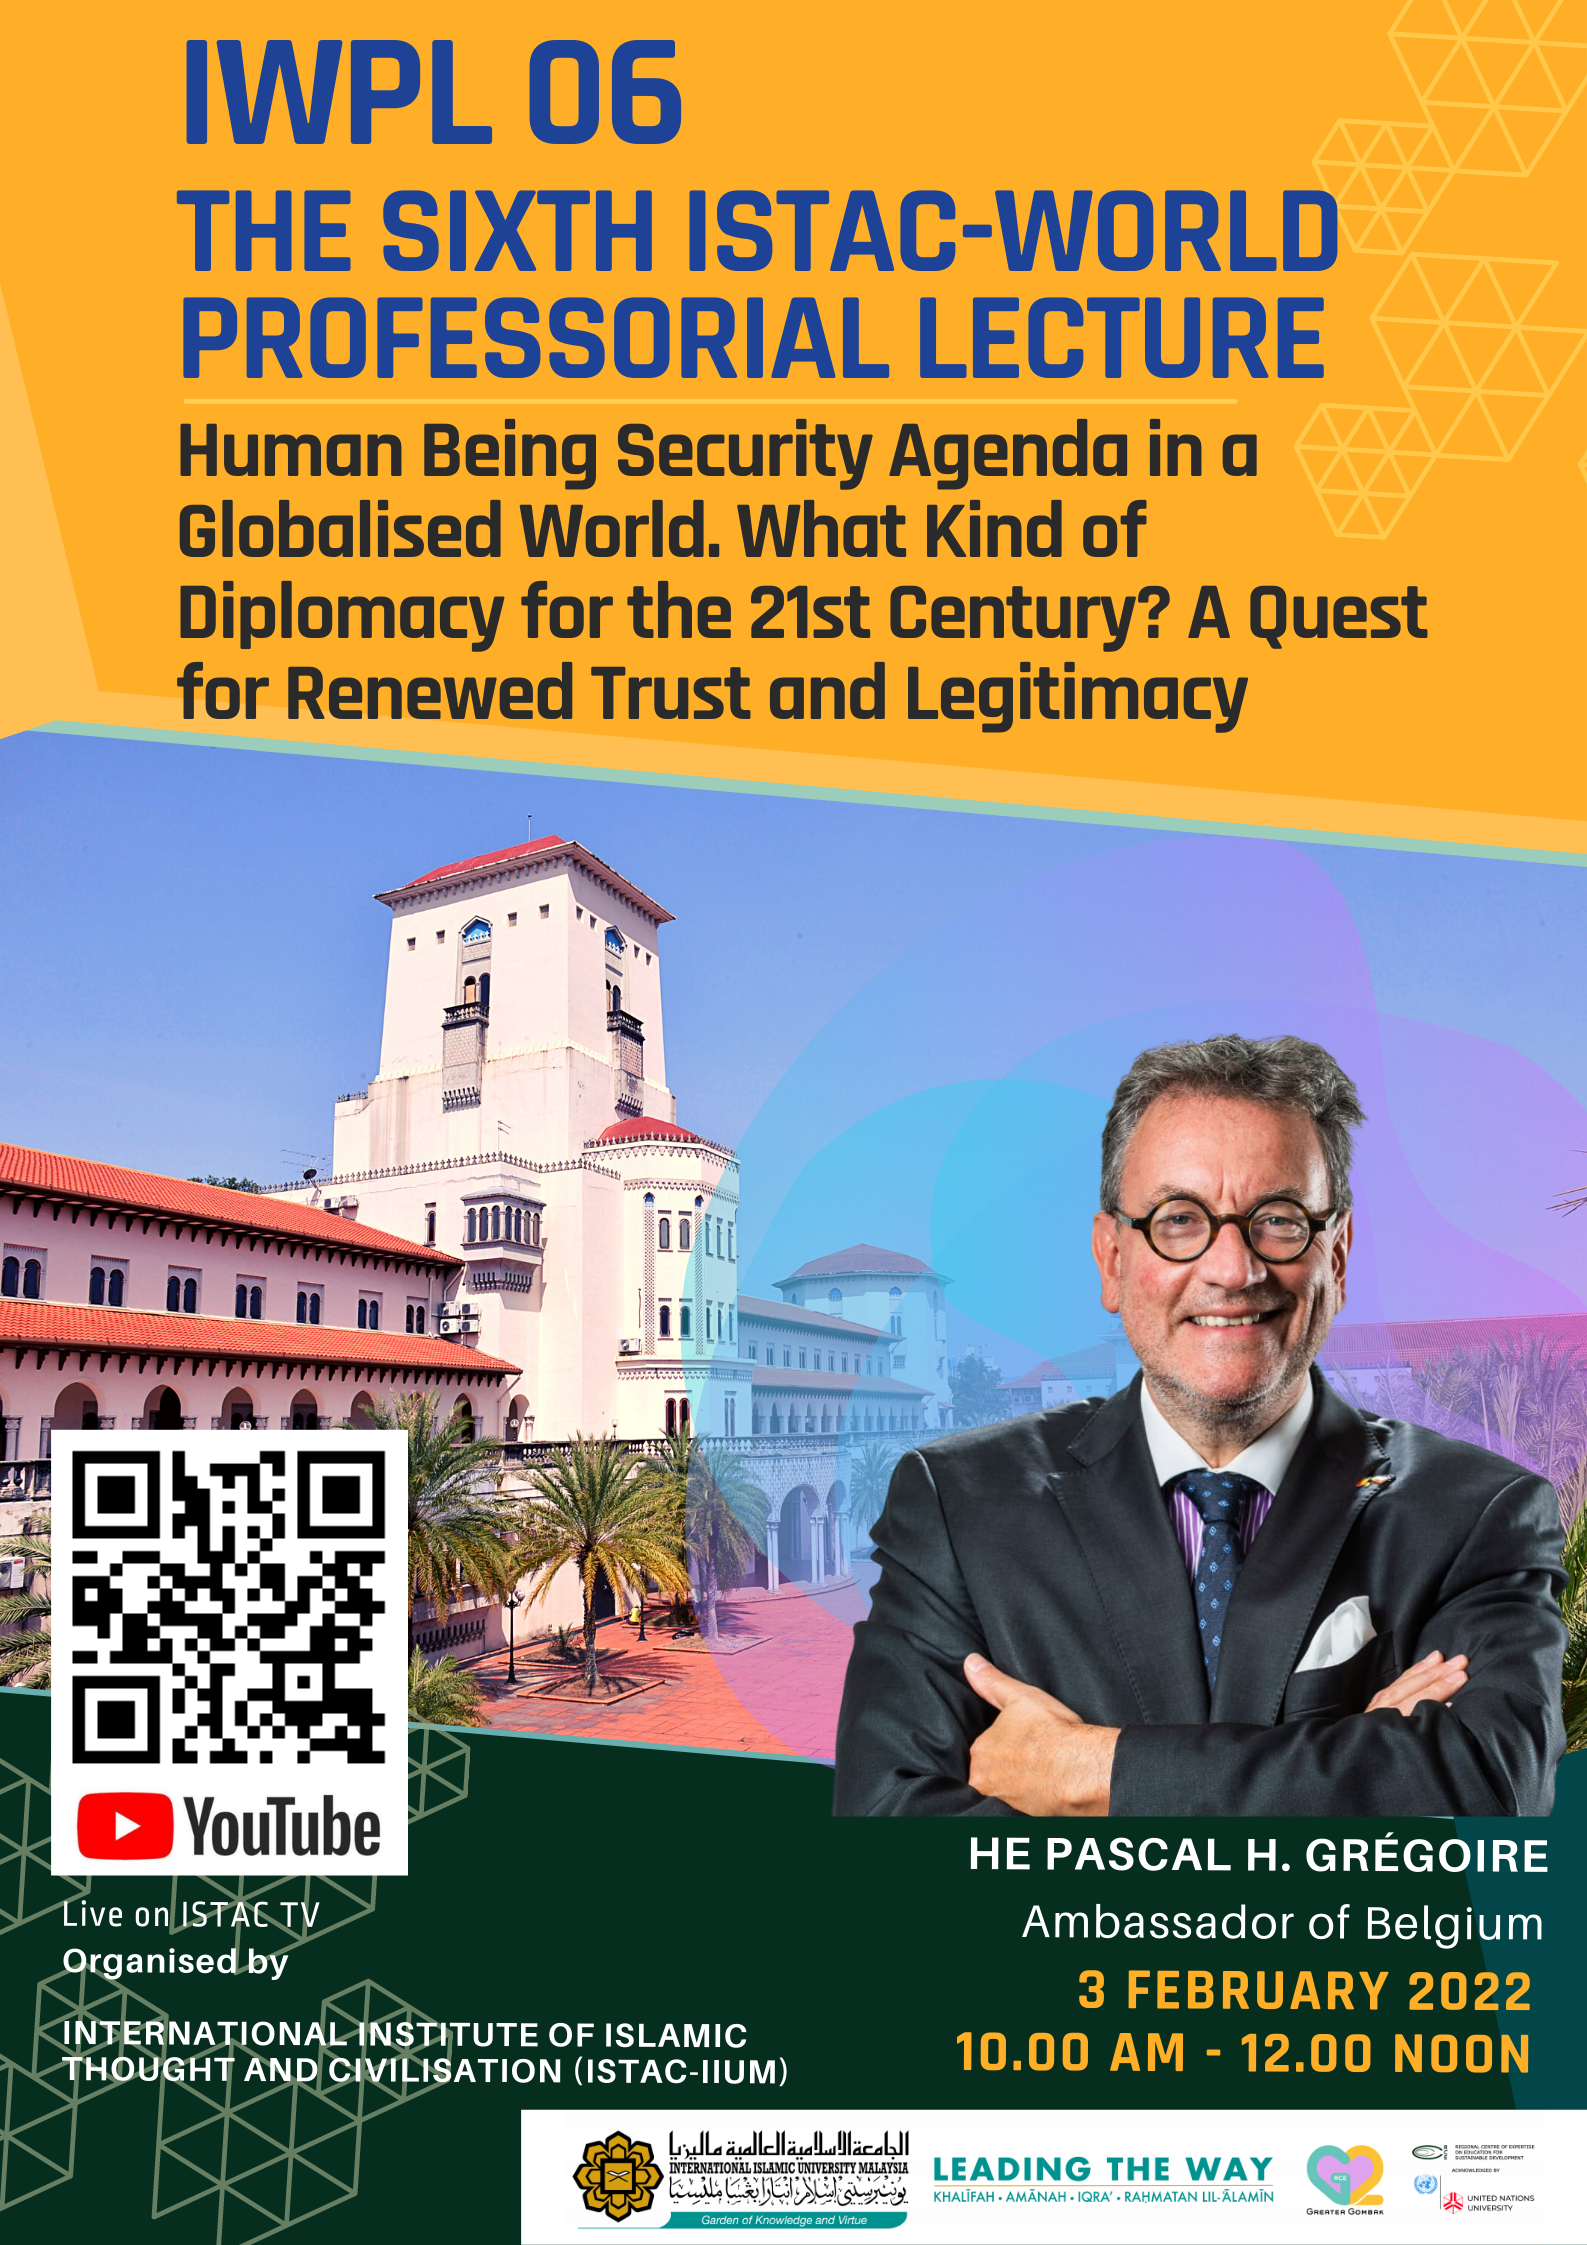 THE 6th ISTAC-WORLD PROFESSORIAL LECTURE - IWPL 06